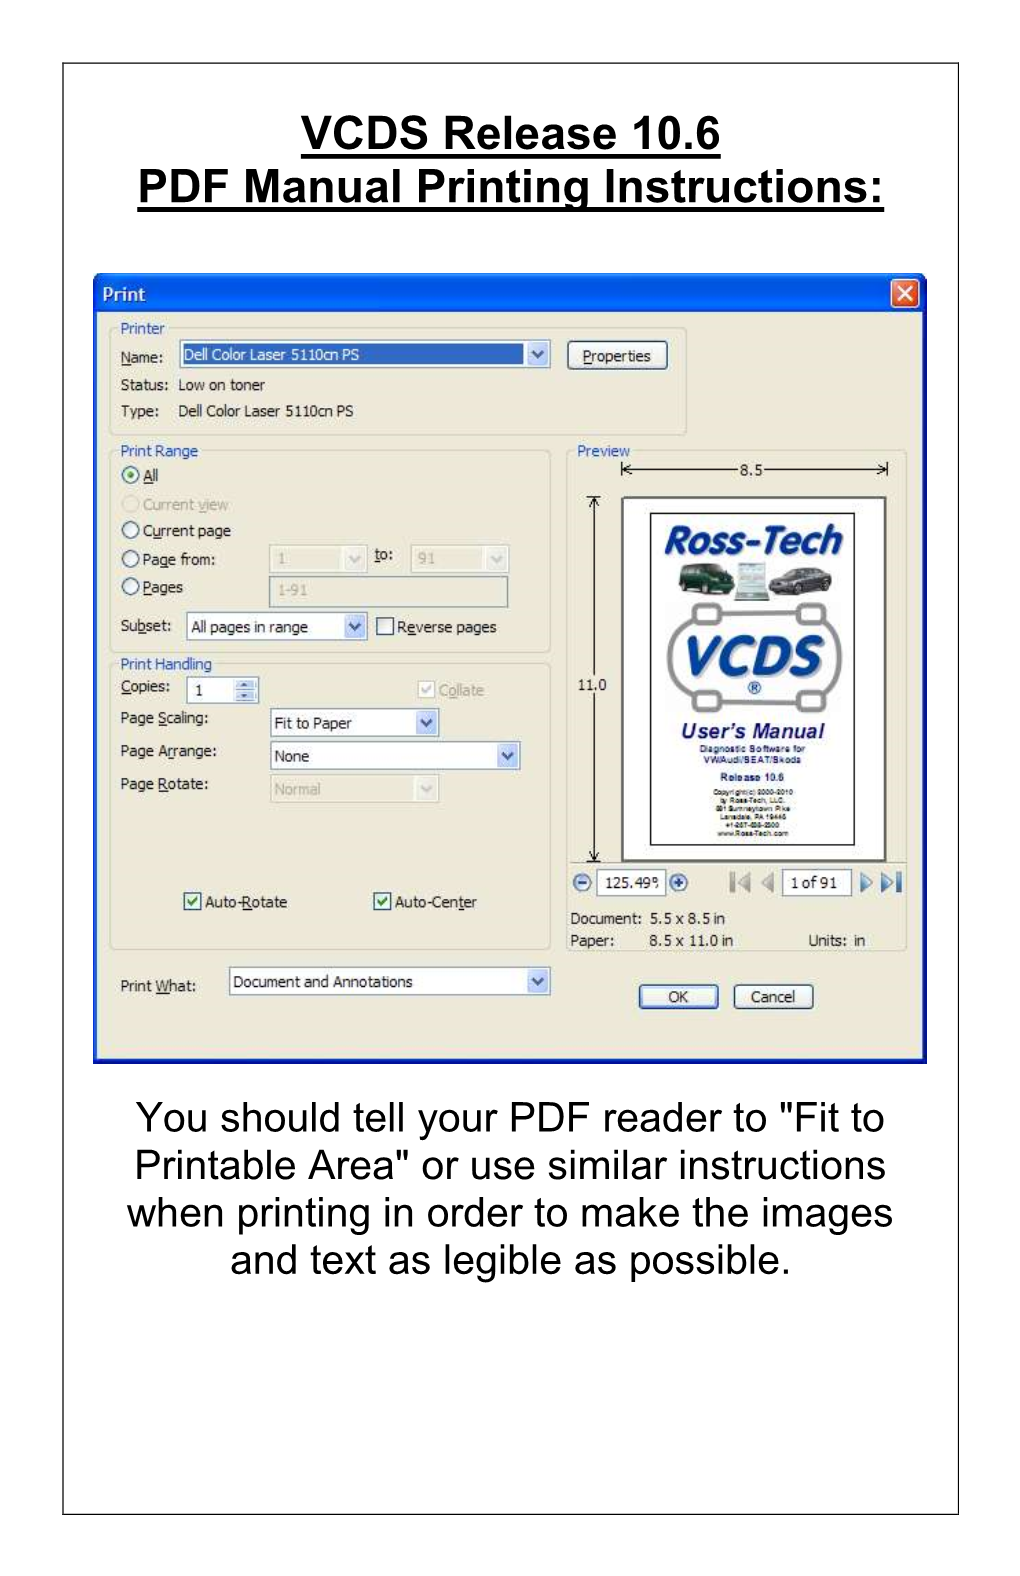 VCDS Release 10.6 PDF Manual Printing Instructions